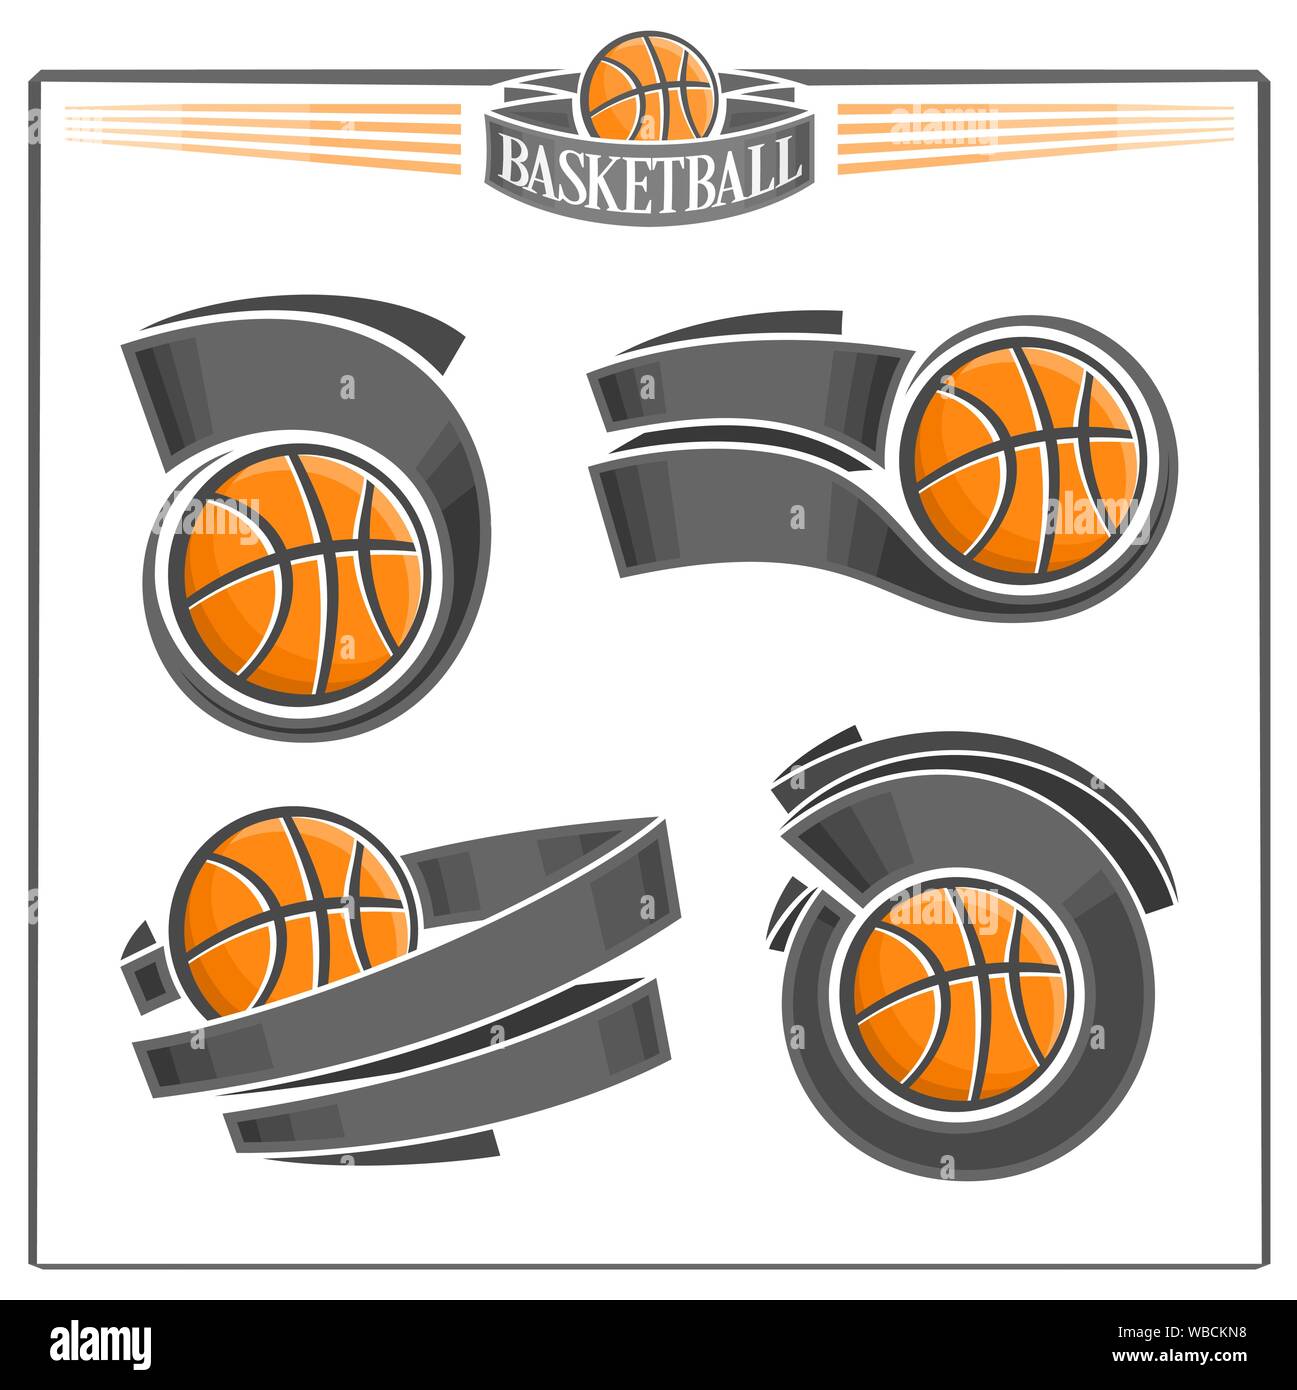 Vector logo for vintage emblems with orange basketball balls and black ribbons for text, isolated on white background. Stock Vector